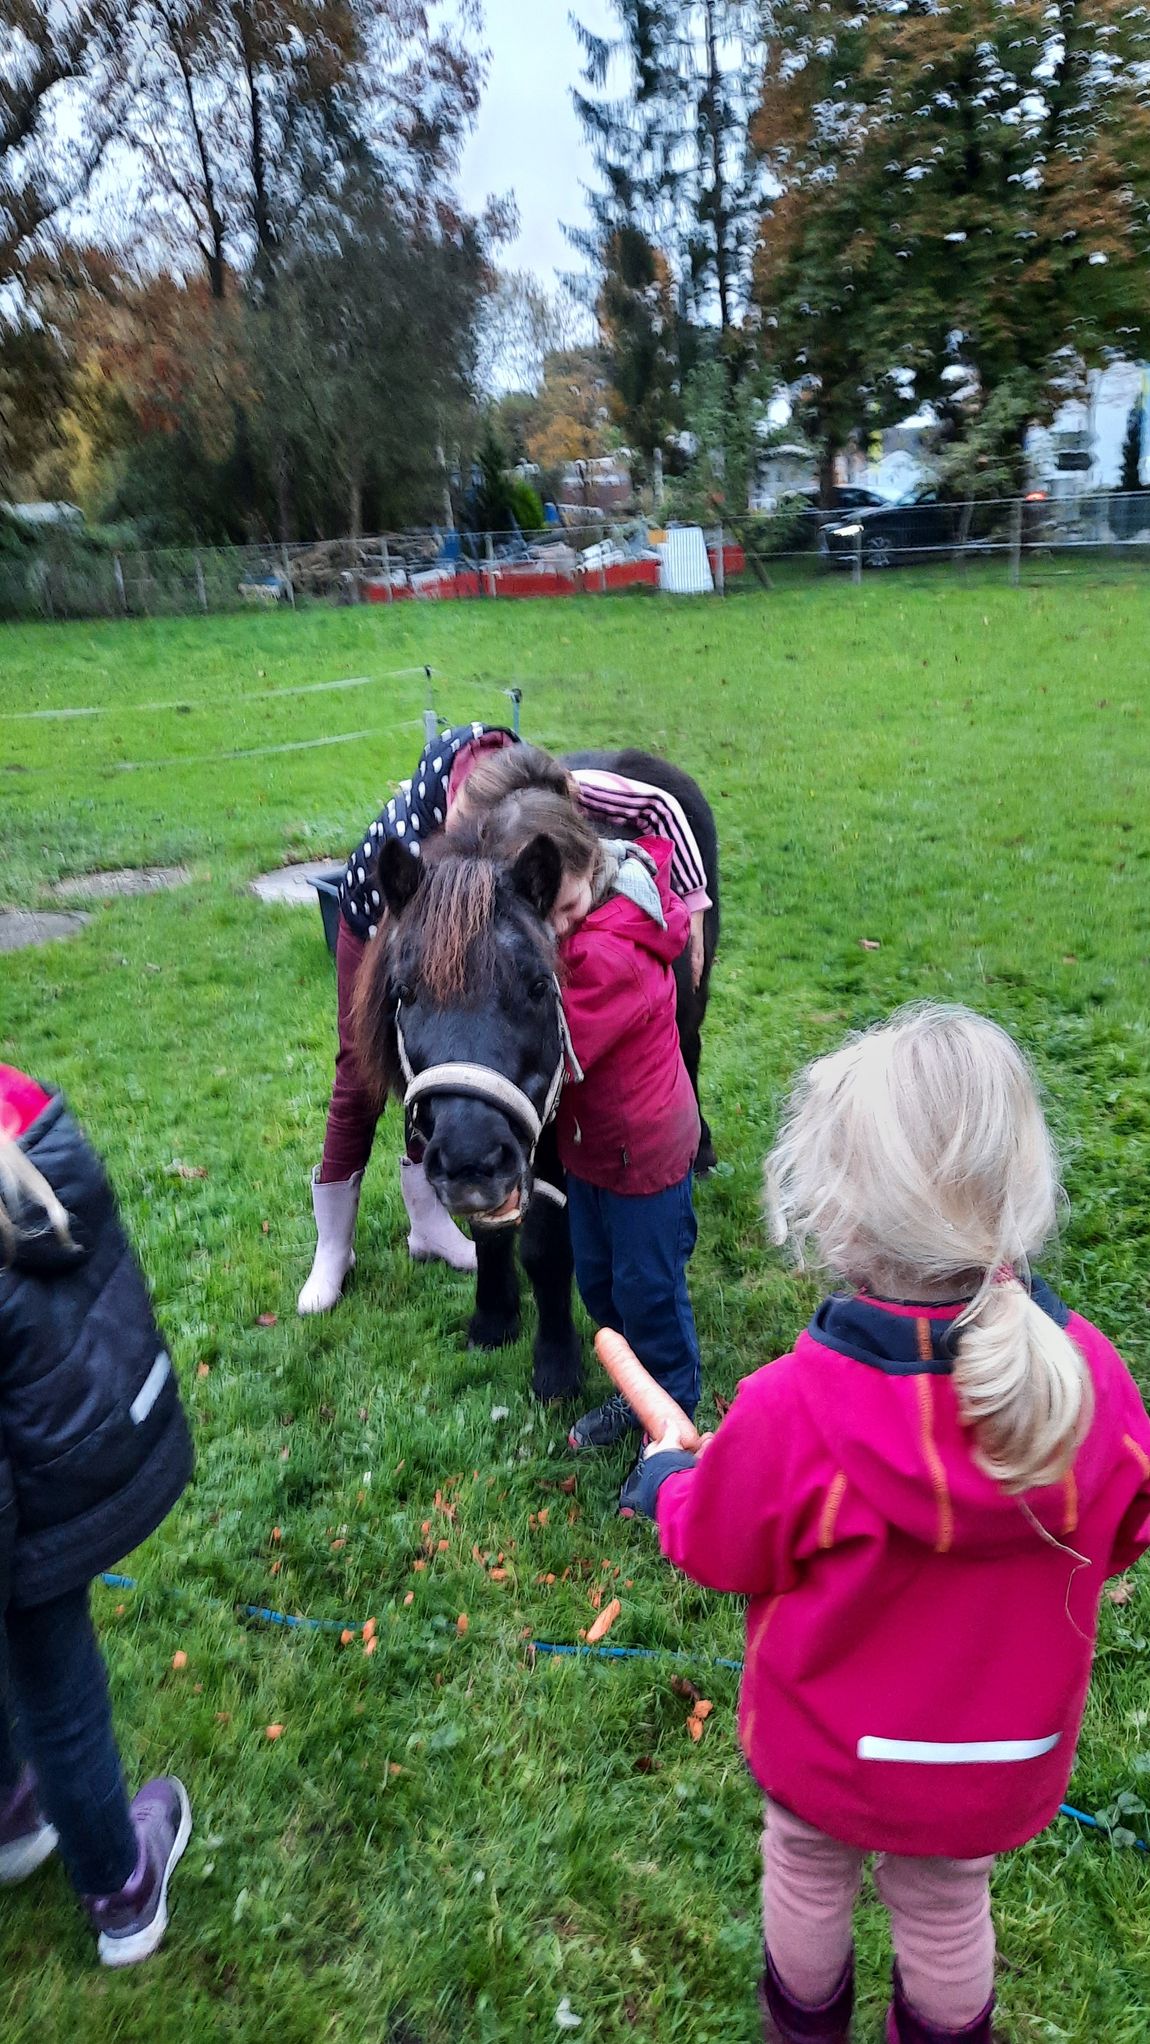 Ponies and horses on the farm in beautiful Ammerland